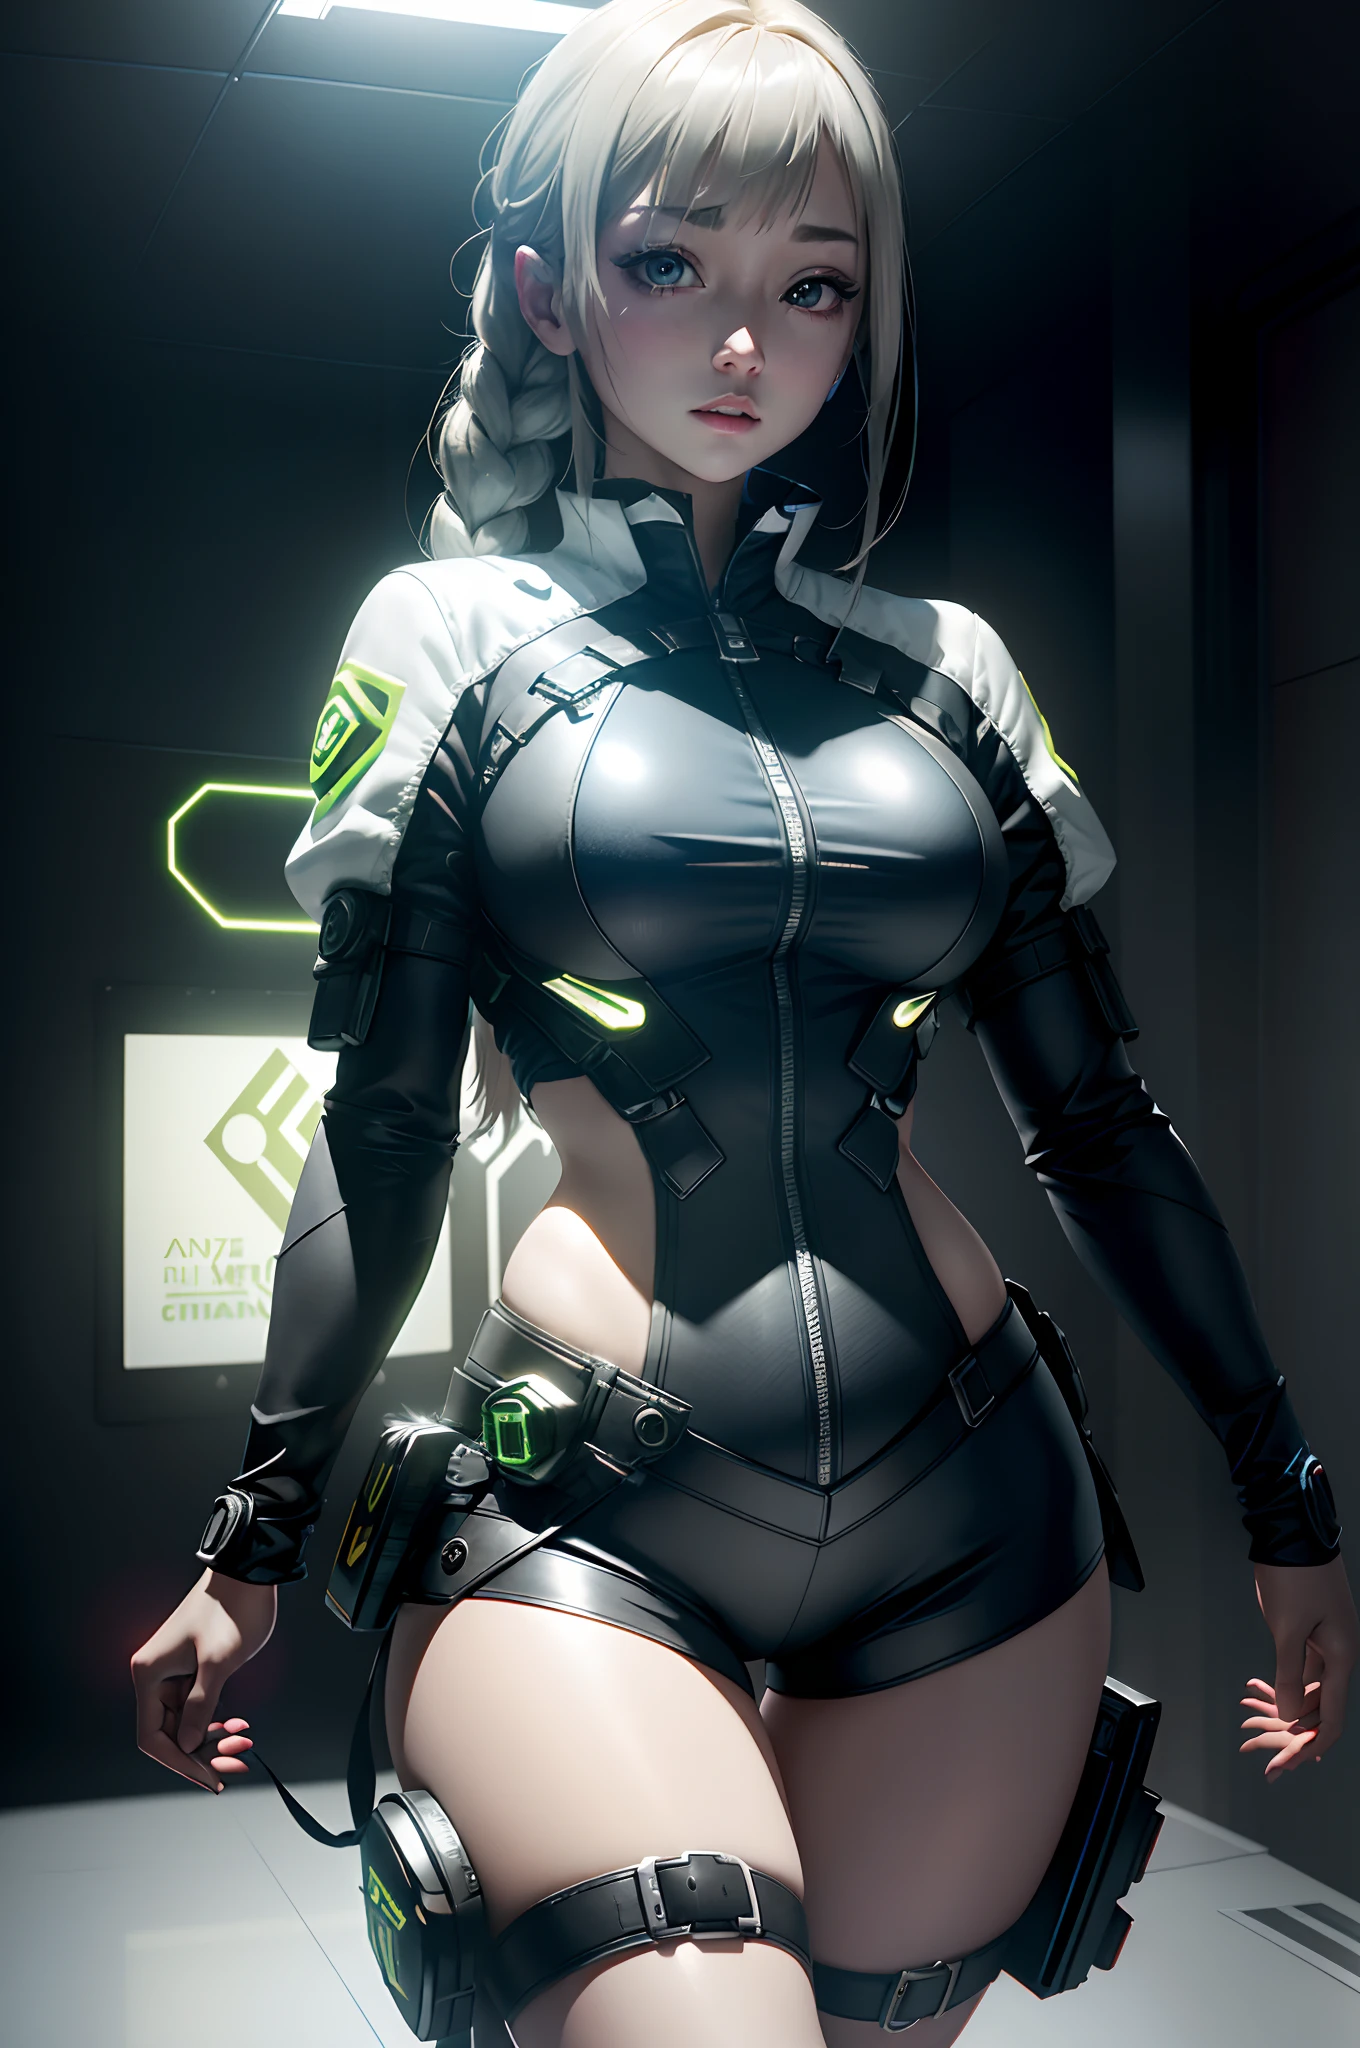 ((best qualtiy)), ((tmasterpiece)), (the detail:1.4), 3D, A beautiful cyberpunk female image,hdr（HighDynamicRange）,Ray traching,NVIDIA RTX,Hyper-Resolution,Unreal 5,Subsurface scattering、PBR Texture、post-proces、Anisotropy Filtering、depth of fieldaximum definition and sharpnesany-Layer Textures、Albedo e mapas Speculares、Surface coloring、Accurate simulation of light-material interactions、perfectly proportions、rendering by octane、Two-colored light、largeaperture、Low ISO、White balance、the rule of thirds、8K raw data、Raised translucent top, smaller top, smaller white lace shorts, raised